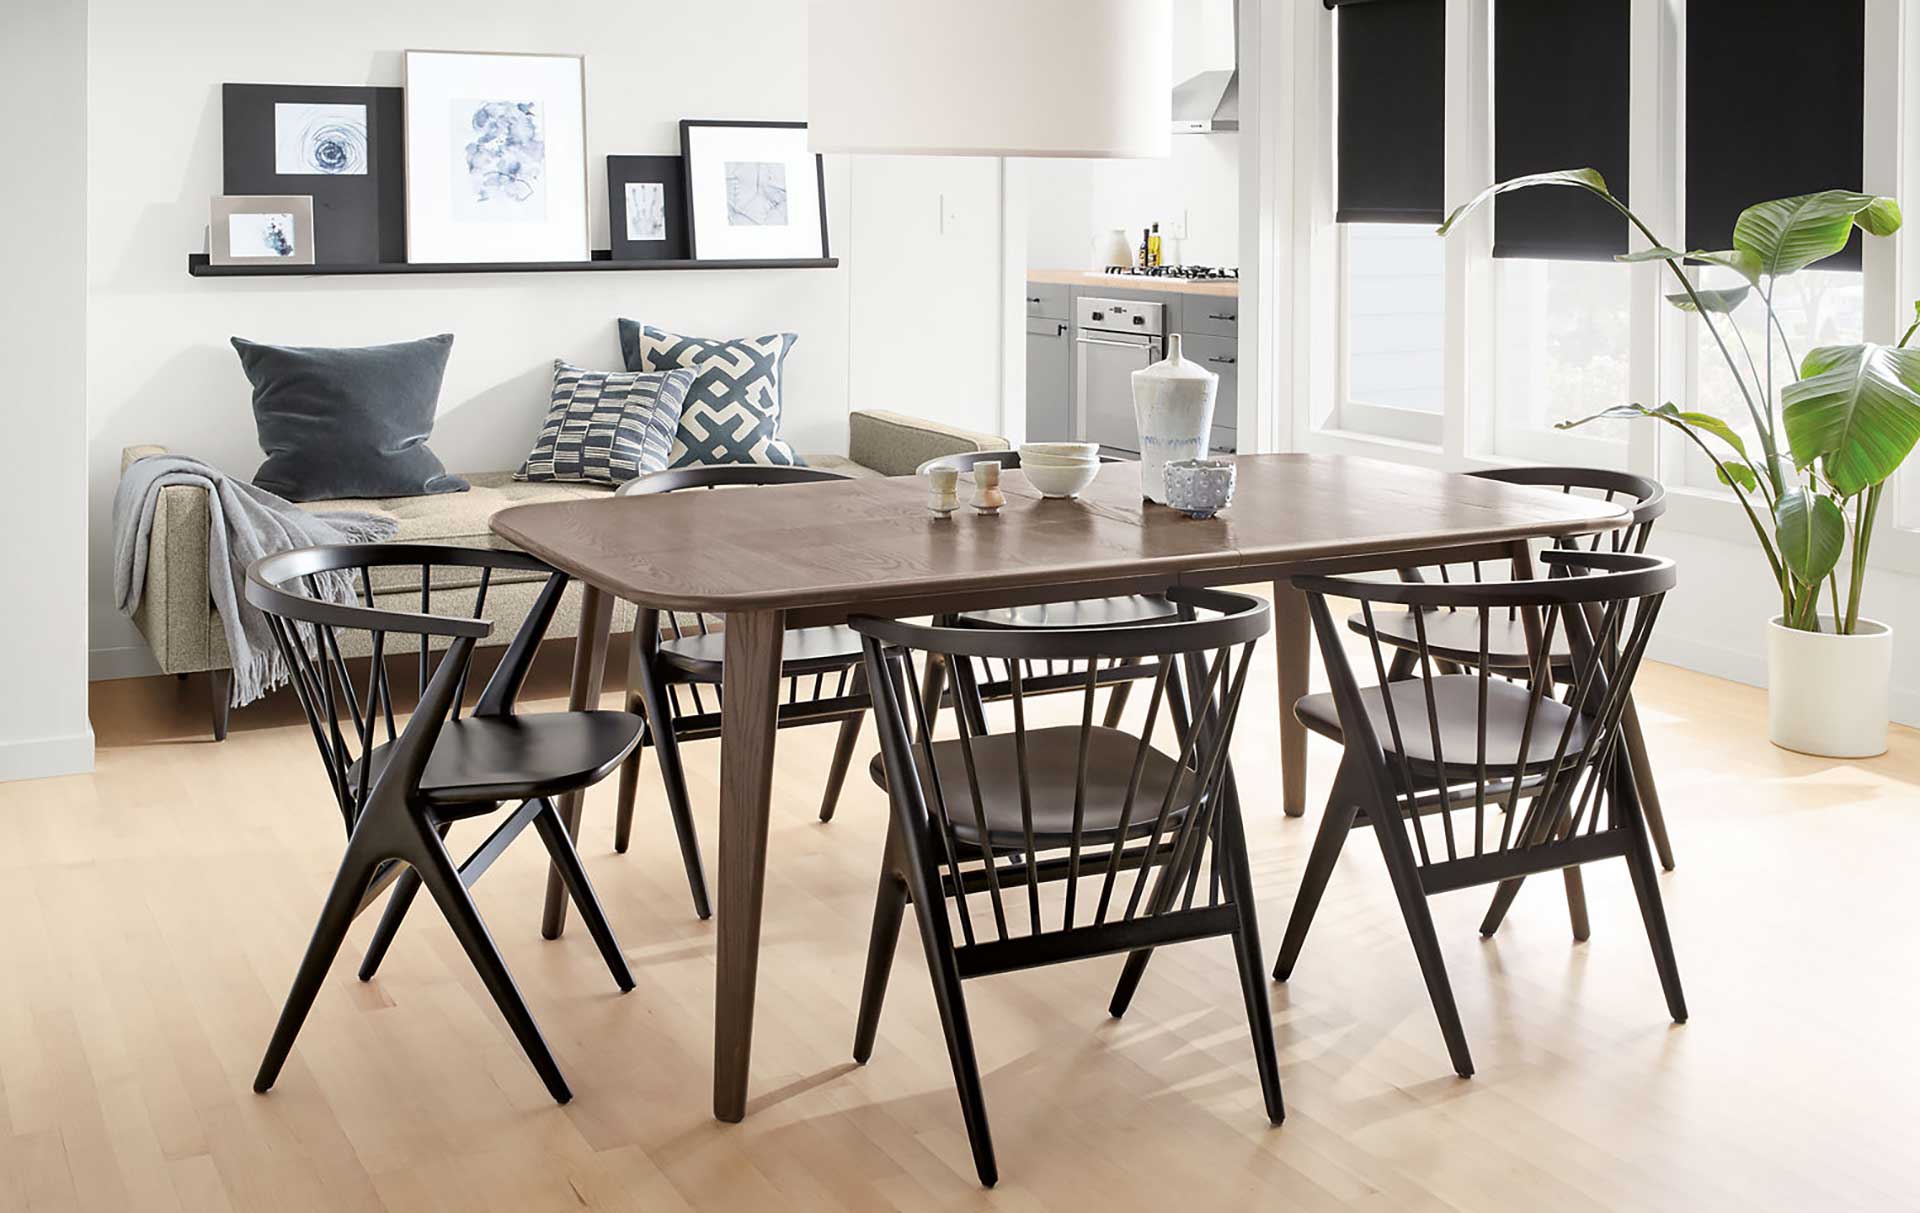 Top Rated Dining Chairs For Casual Or Formal Spaces